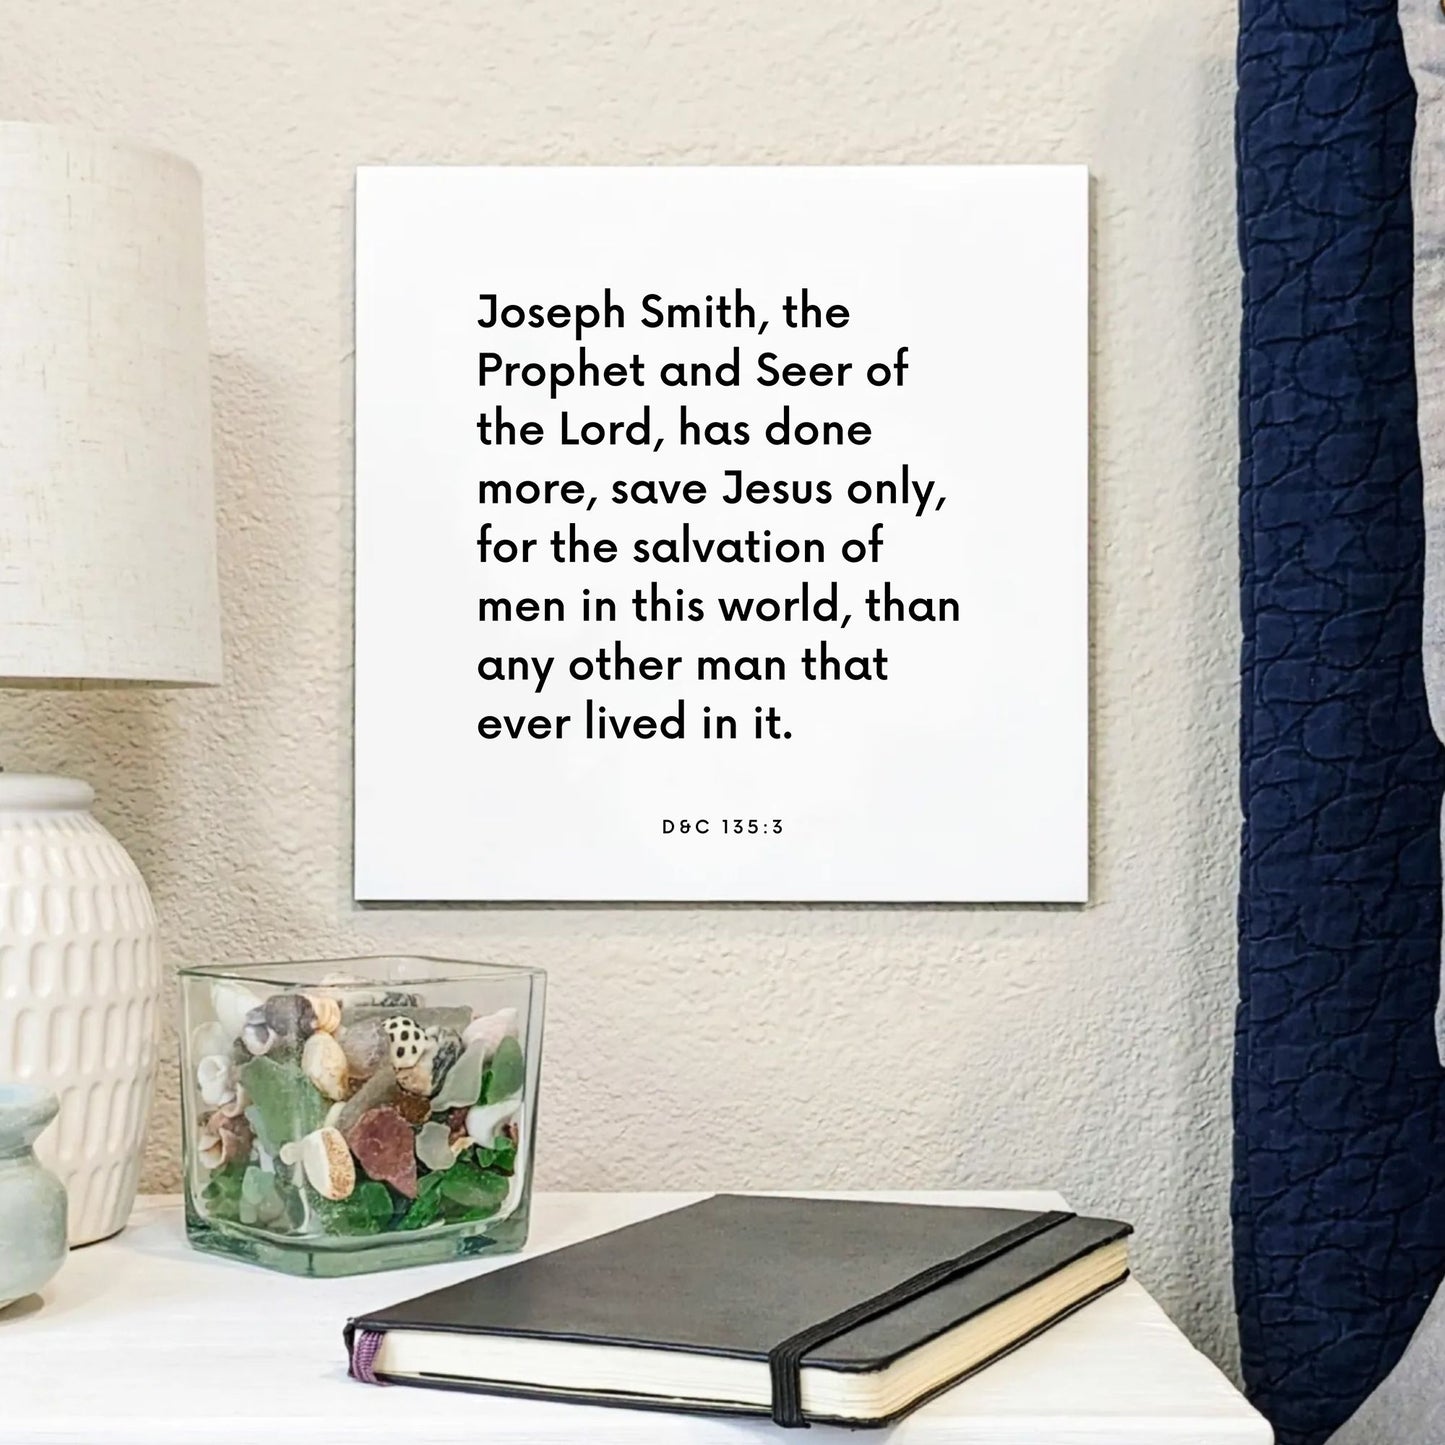 Bedside mouting of the scripture tile for D&C 135:3 - "Joseph Smith, the Prophet and Seer of the Lord"